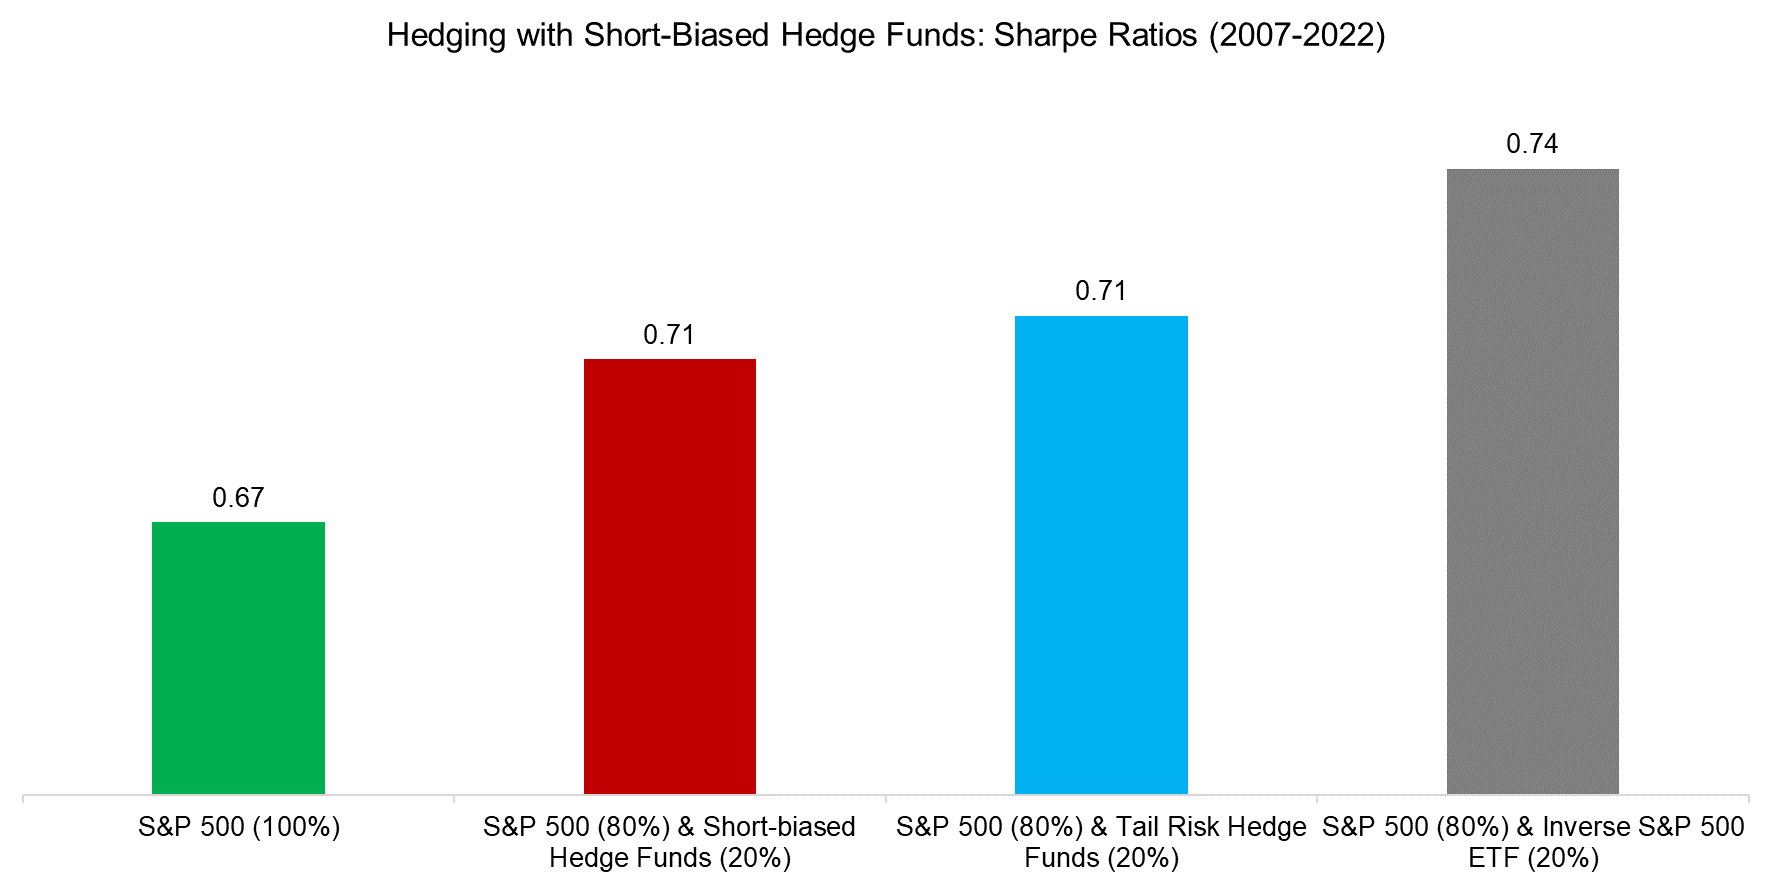 Hedging with Short-Biased Hedge Funds Sharpe Ratios (2007-2022)